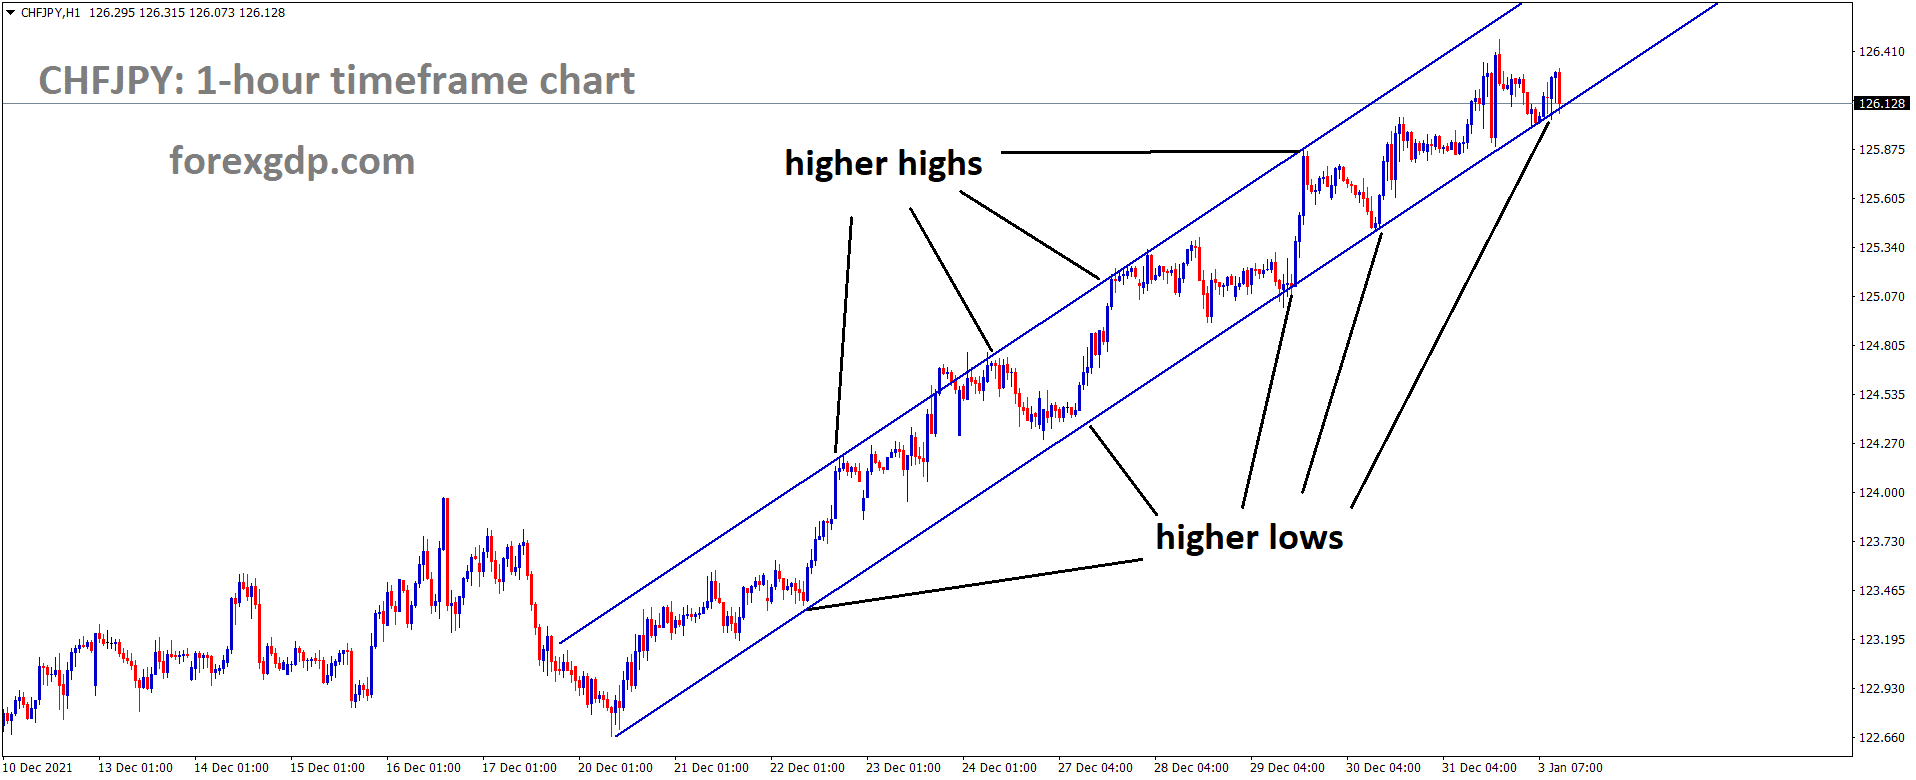 CHFJPY is moving in an Ascending channel and the market has reached the higher low area of the channel